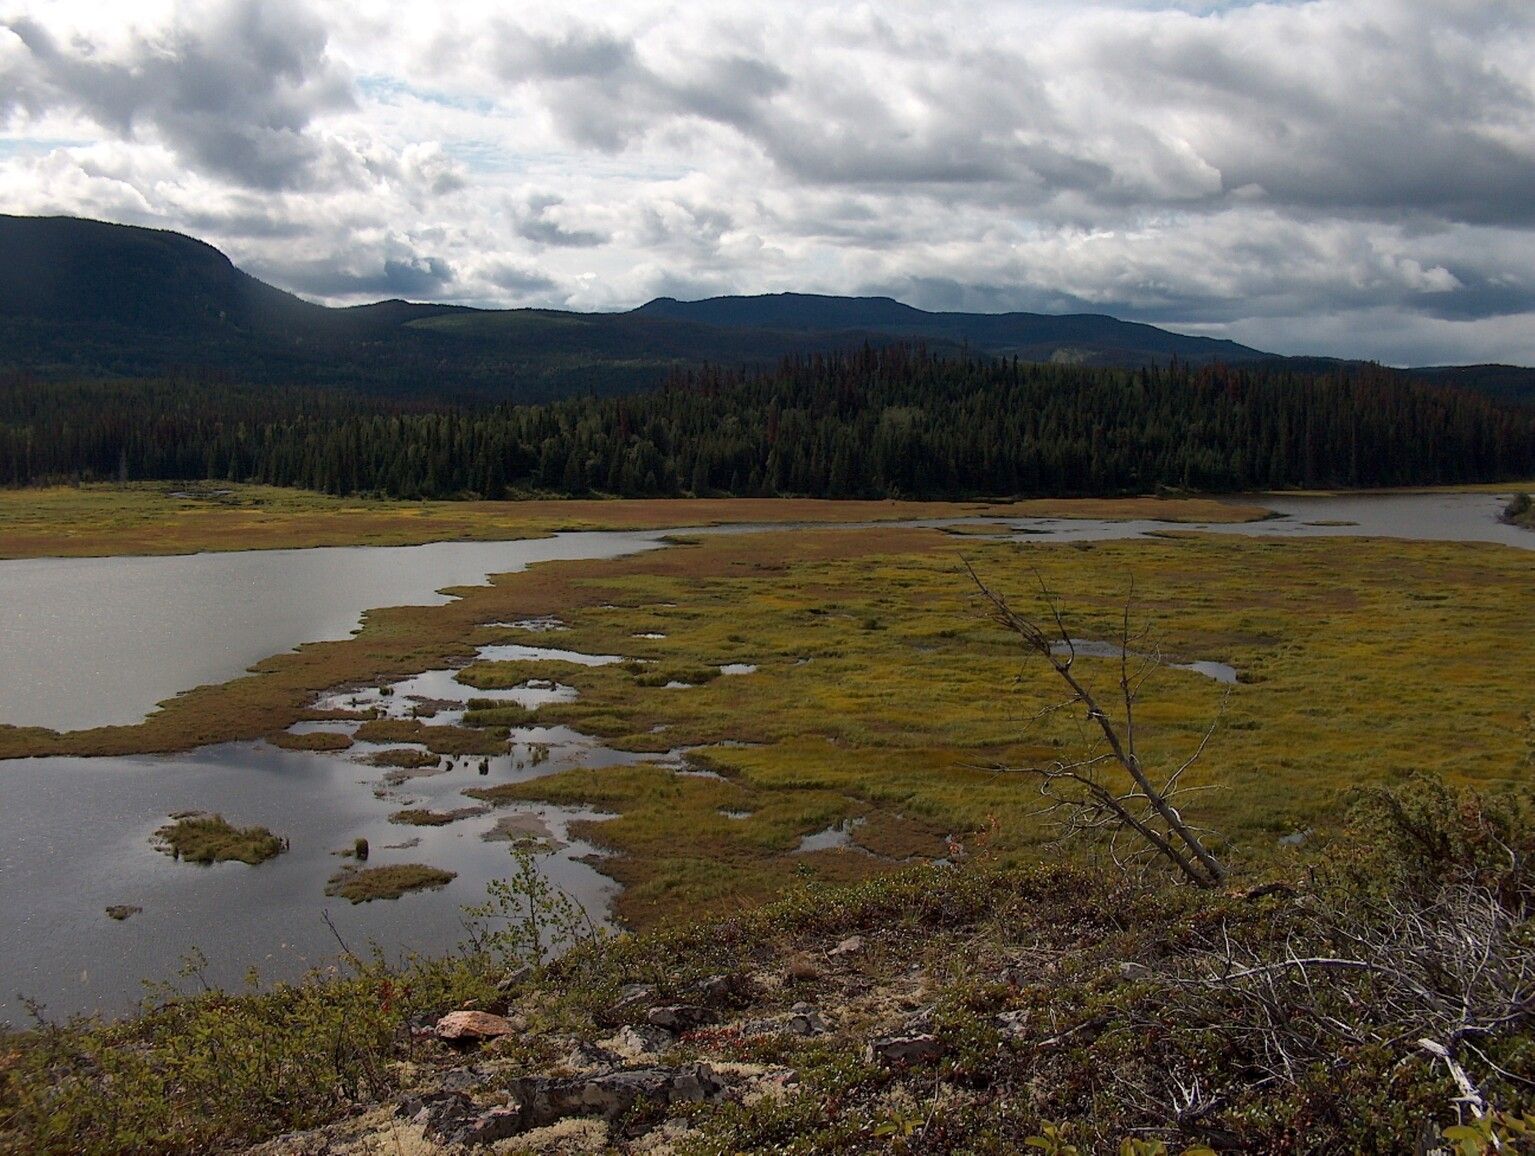 Wetland area at the West end of Old Man Lake.